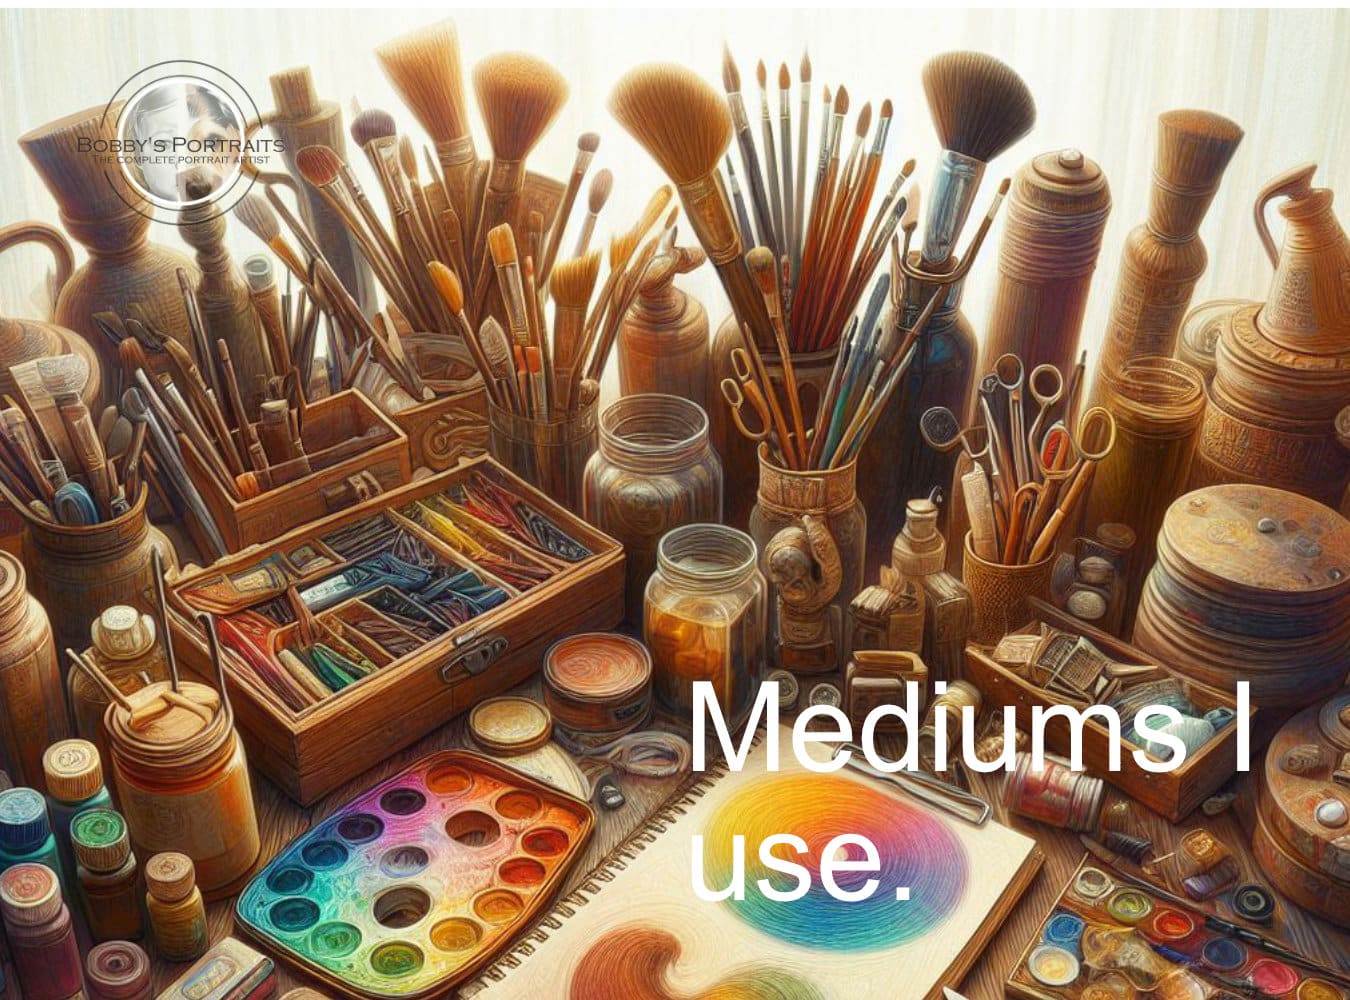 Featured image for “The mediums I mainly use.”